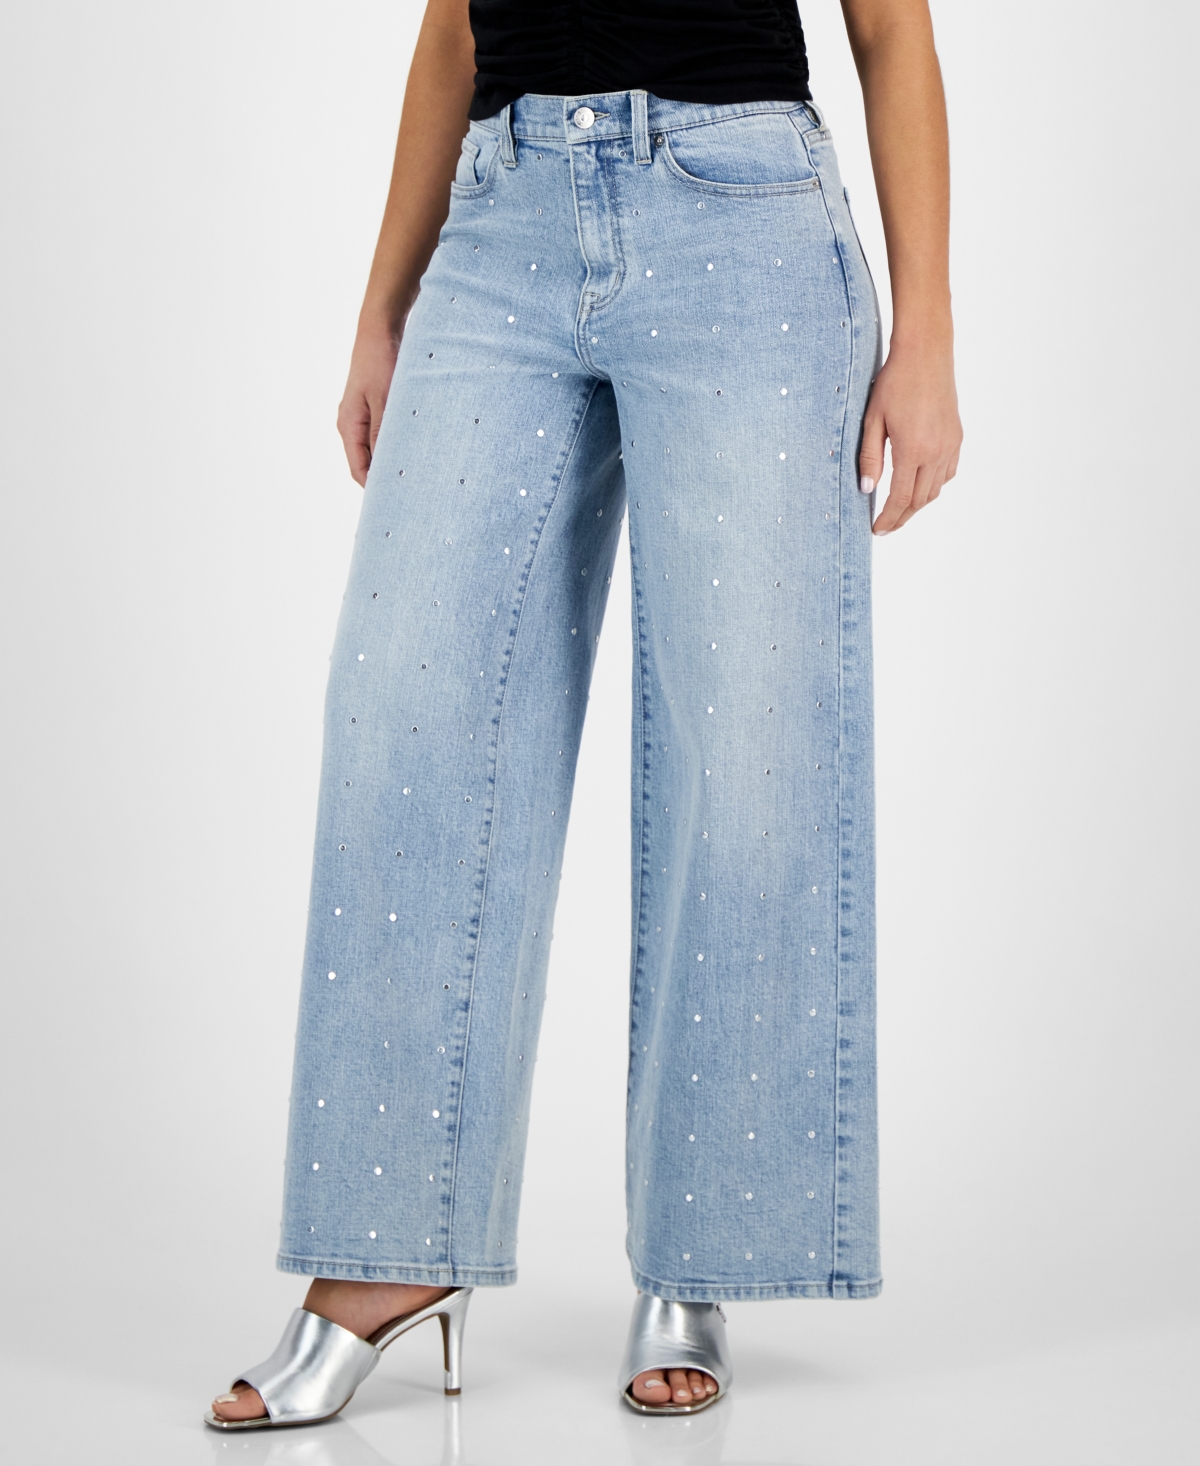 Shop Dkny Jeans Women's High Rise Studded Wide Leg Jeans In Aw - Atlantic Wash